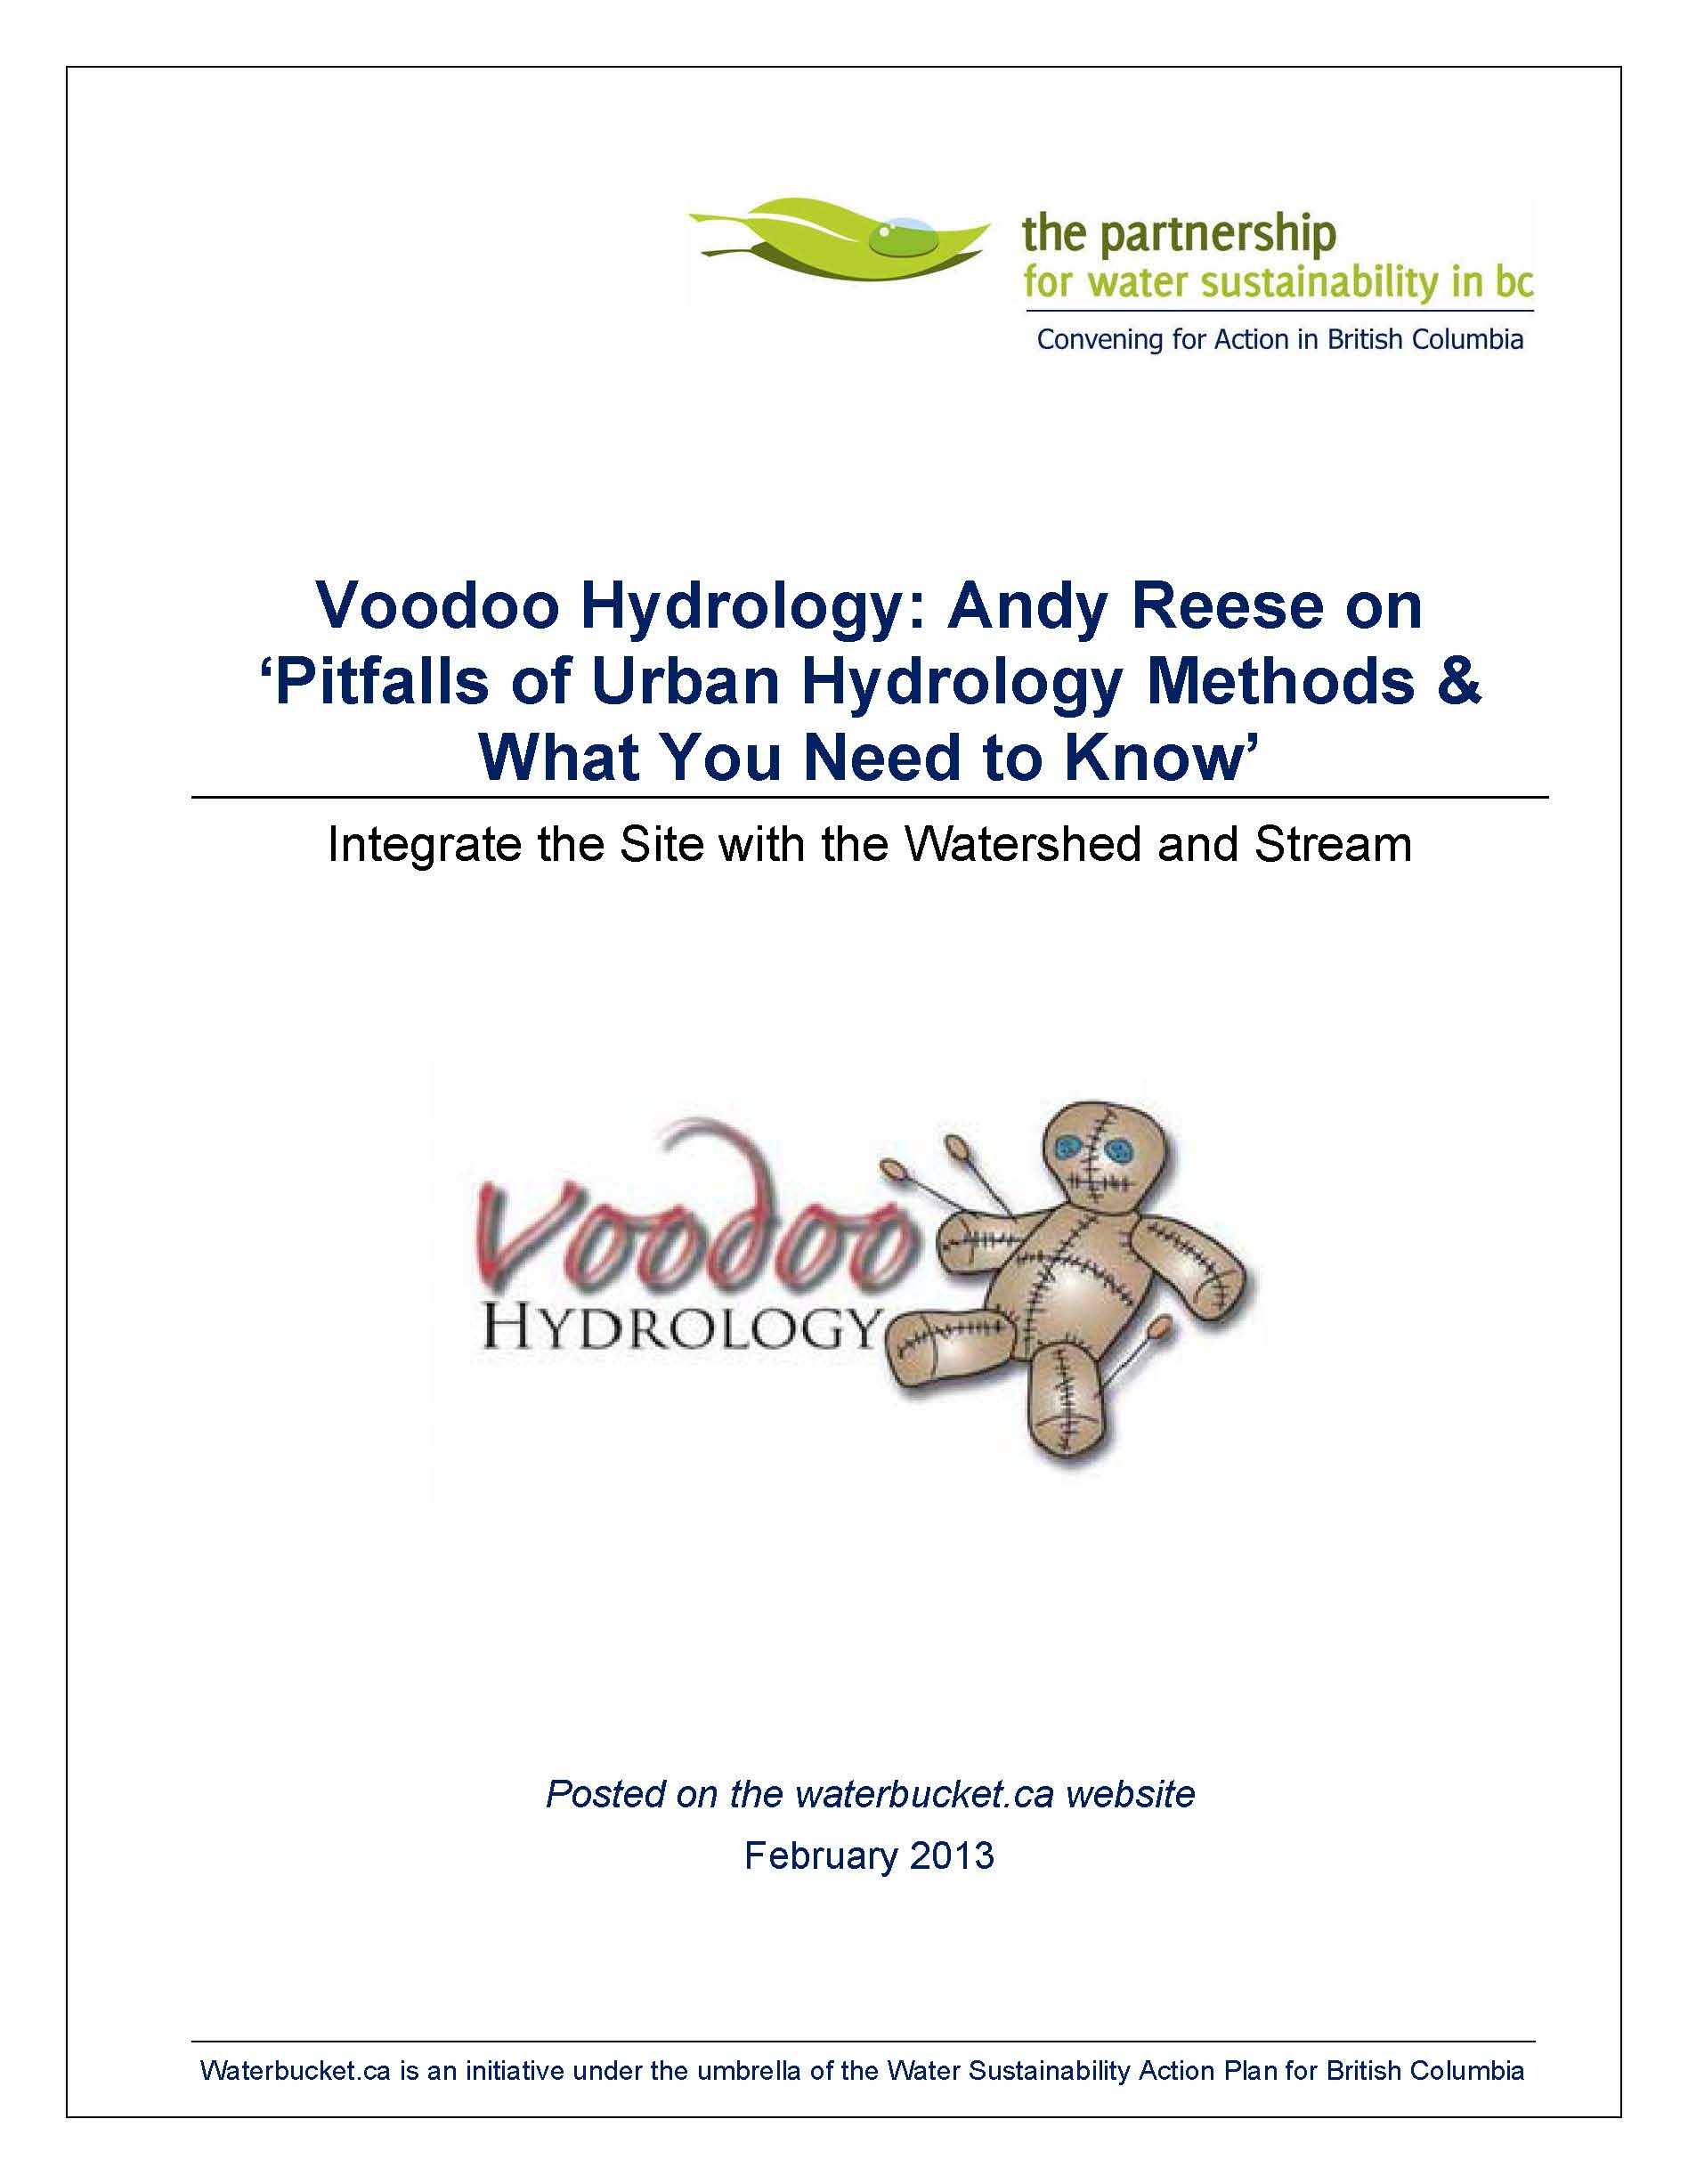 Andy-Reese_Voodoo-Hydrology_Pitfalls-What-Need-to-Know_Feb-2013_cover